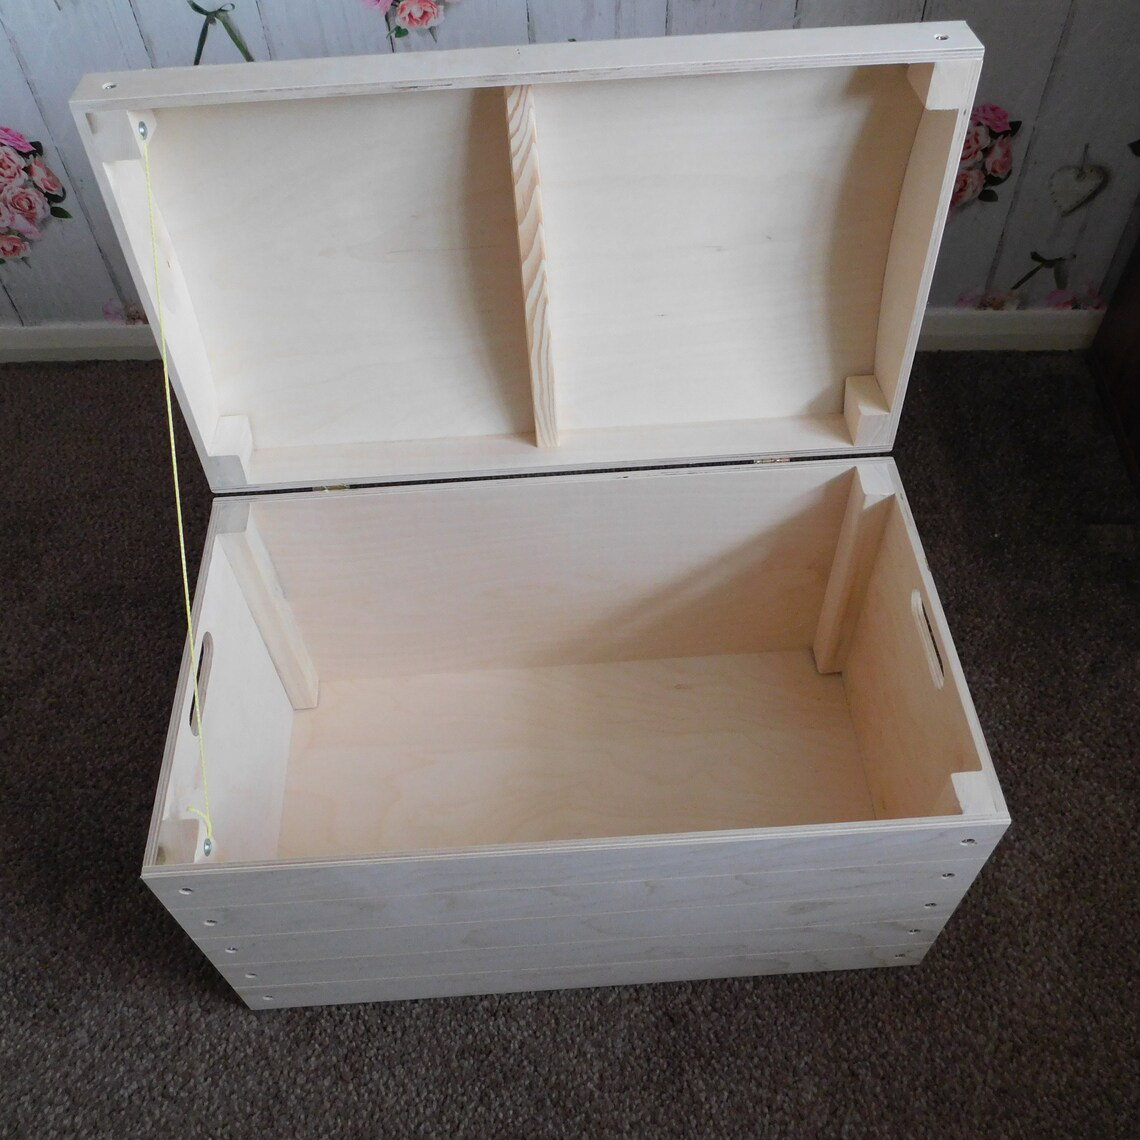 Large Wooden Storage Box with Curved Lid and Handles - Close Up